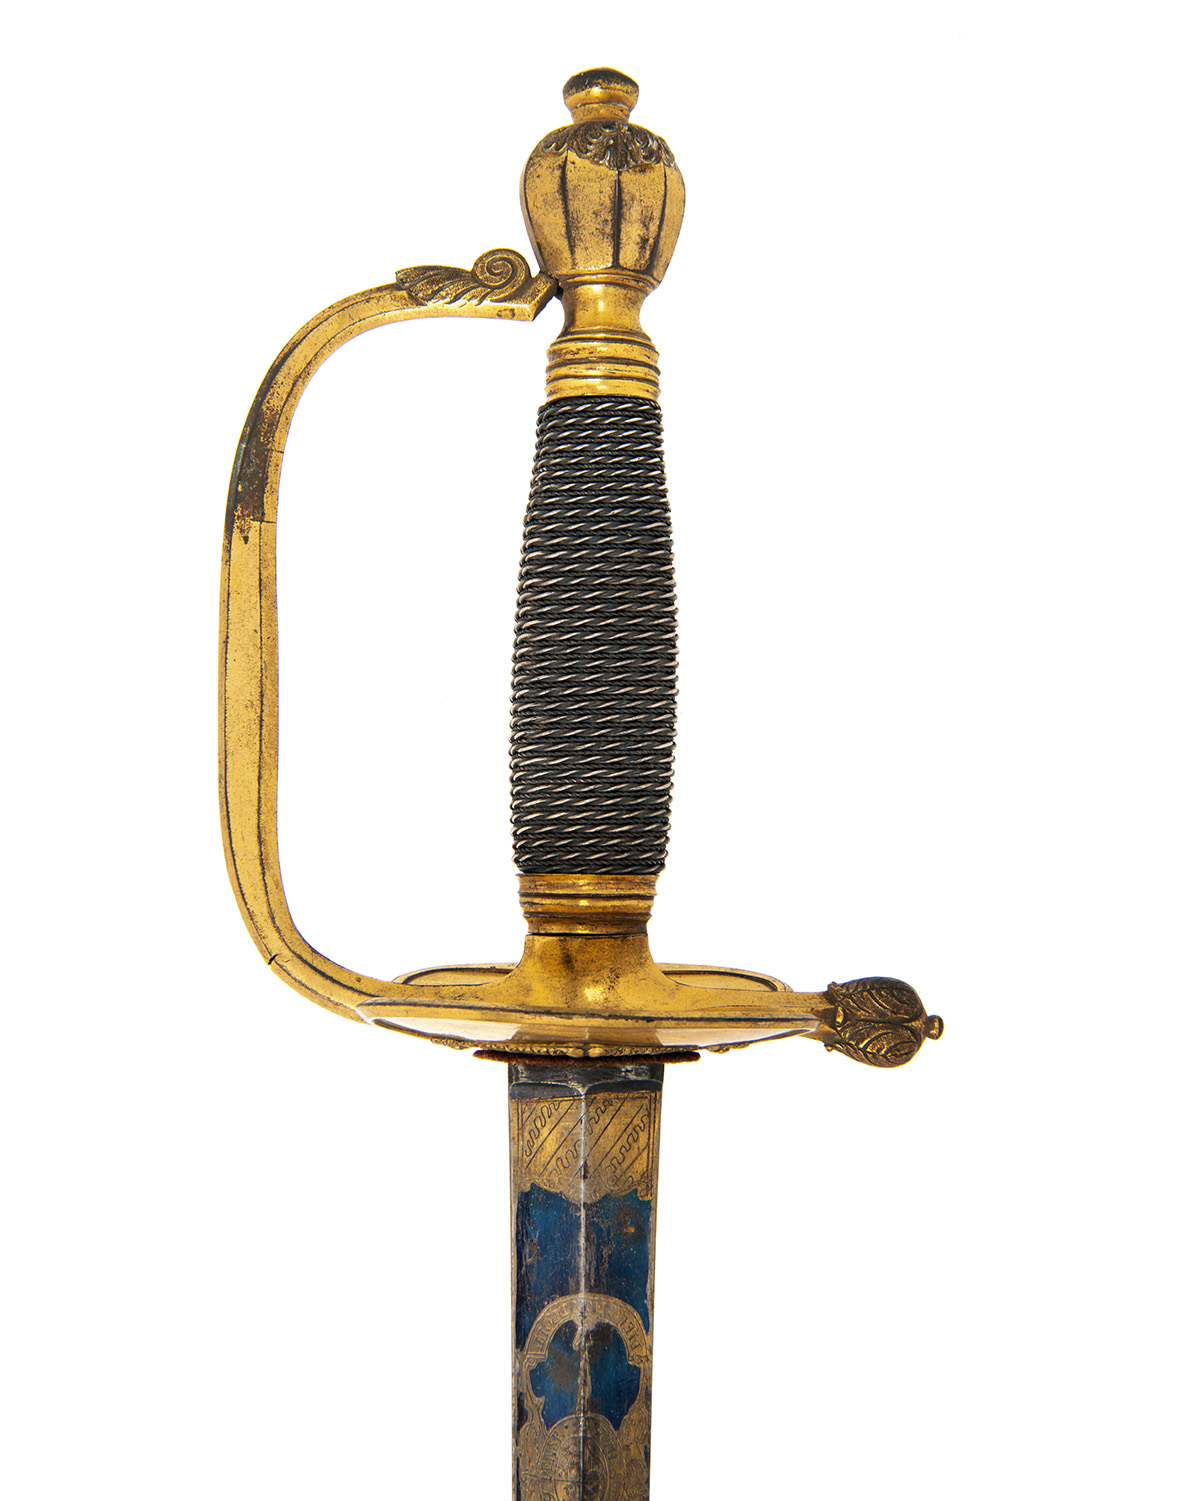 TATHAM, LONDON A FINE BRITISH INFANTRY 1786 PATTERN OFFICER'S SWORD WITH BLUE AND GILT BLADE, - Image 5 of 7